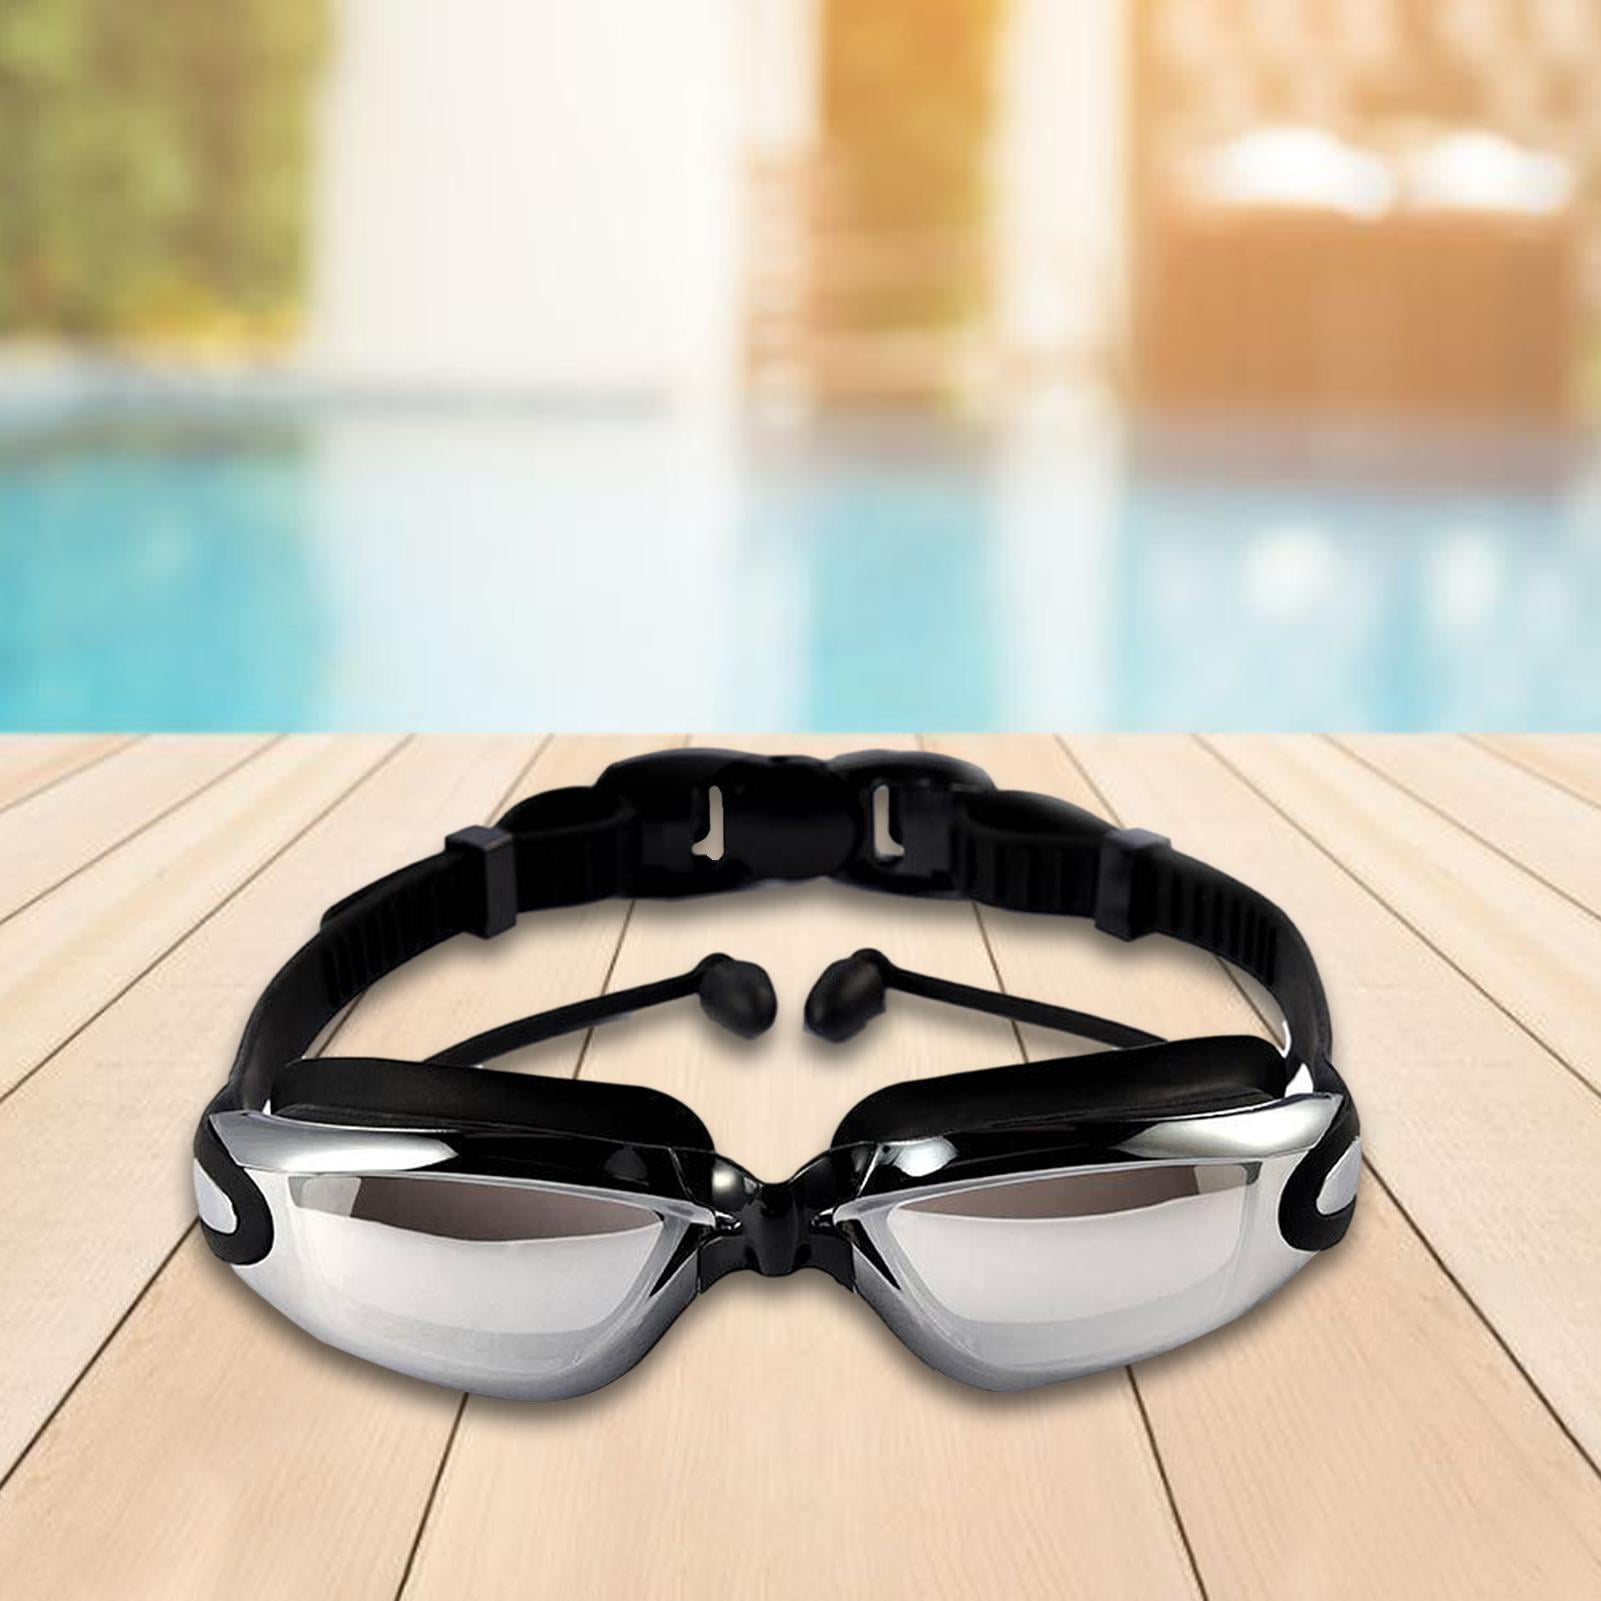 Details about   Anti-fog UV protection Lens Men Women Waterproof  Adjustable Swimming Goggles 